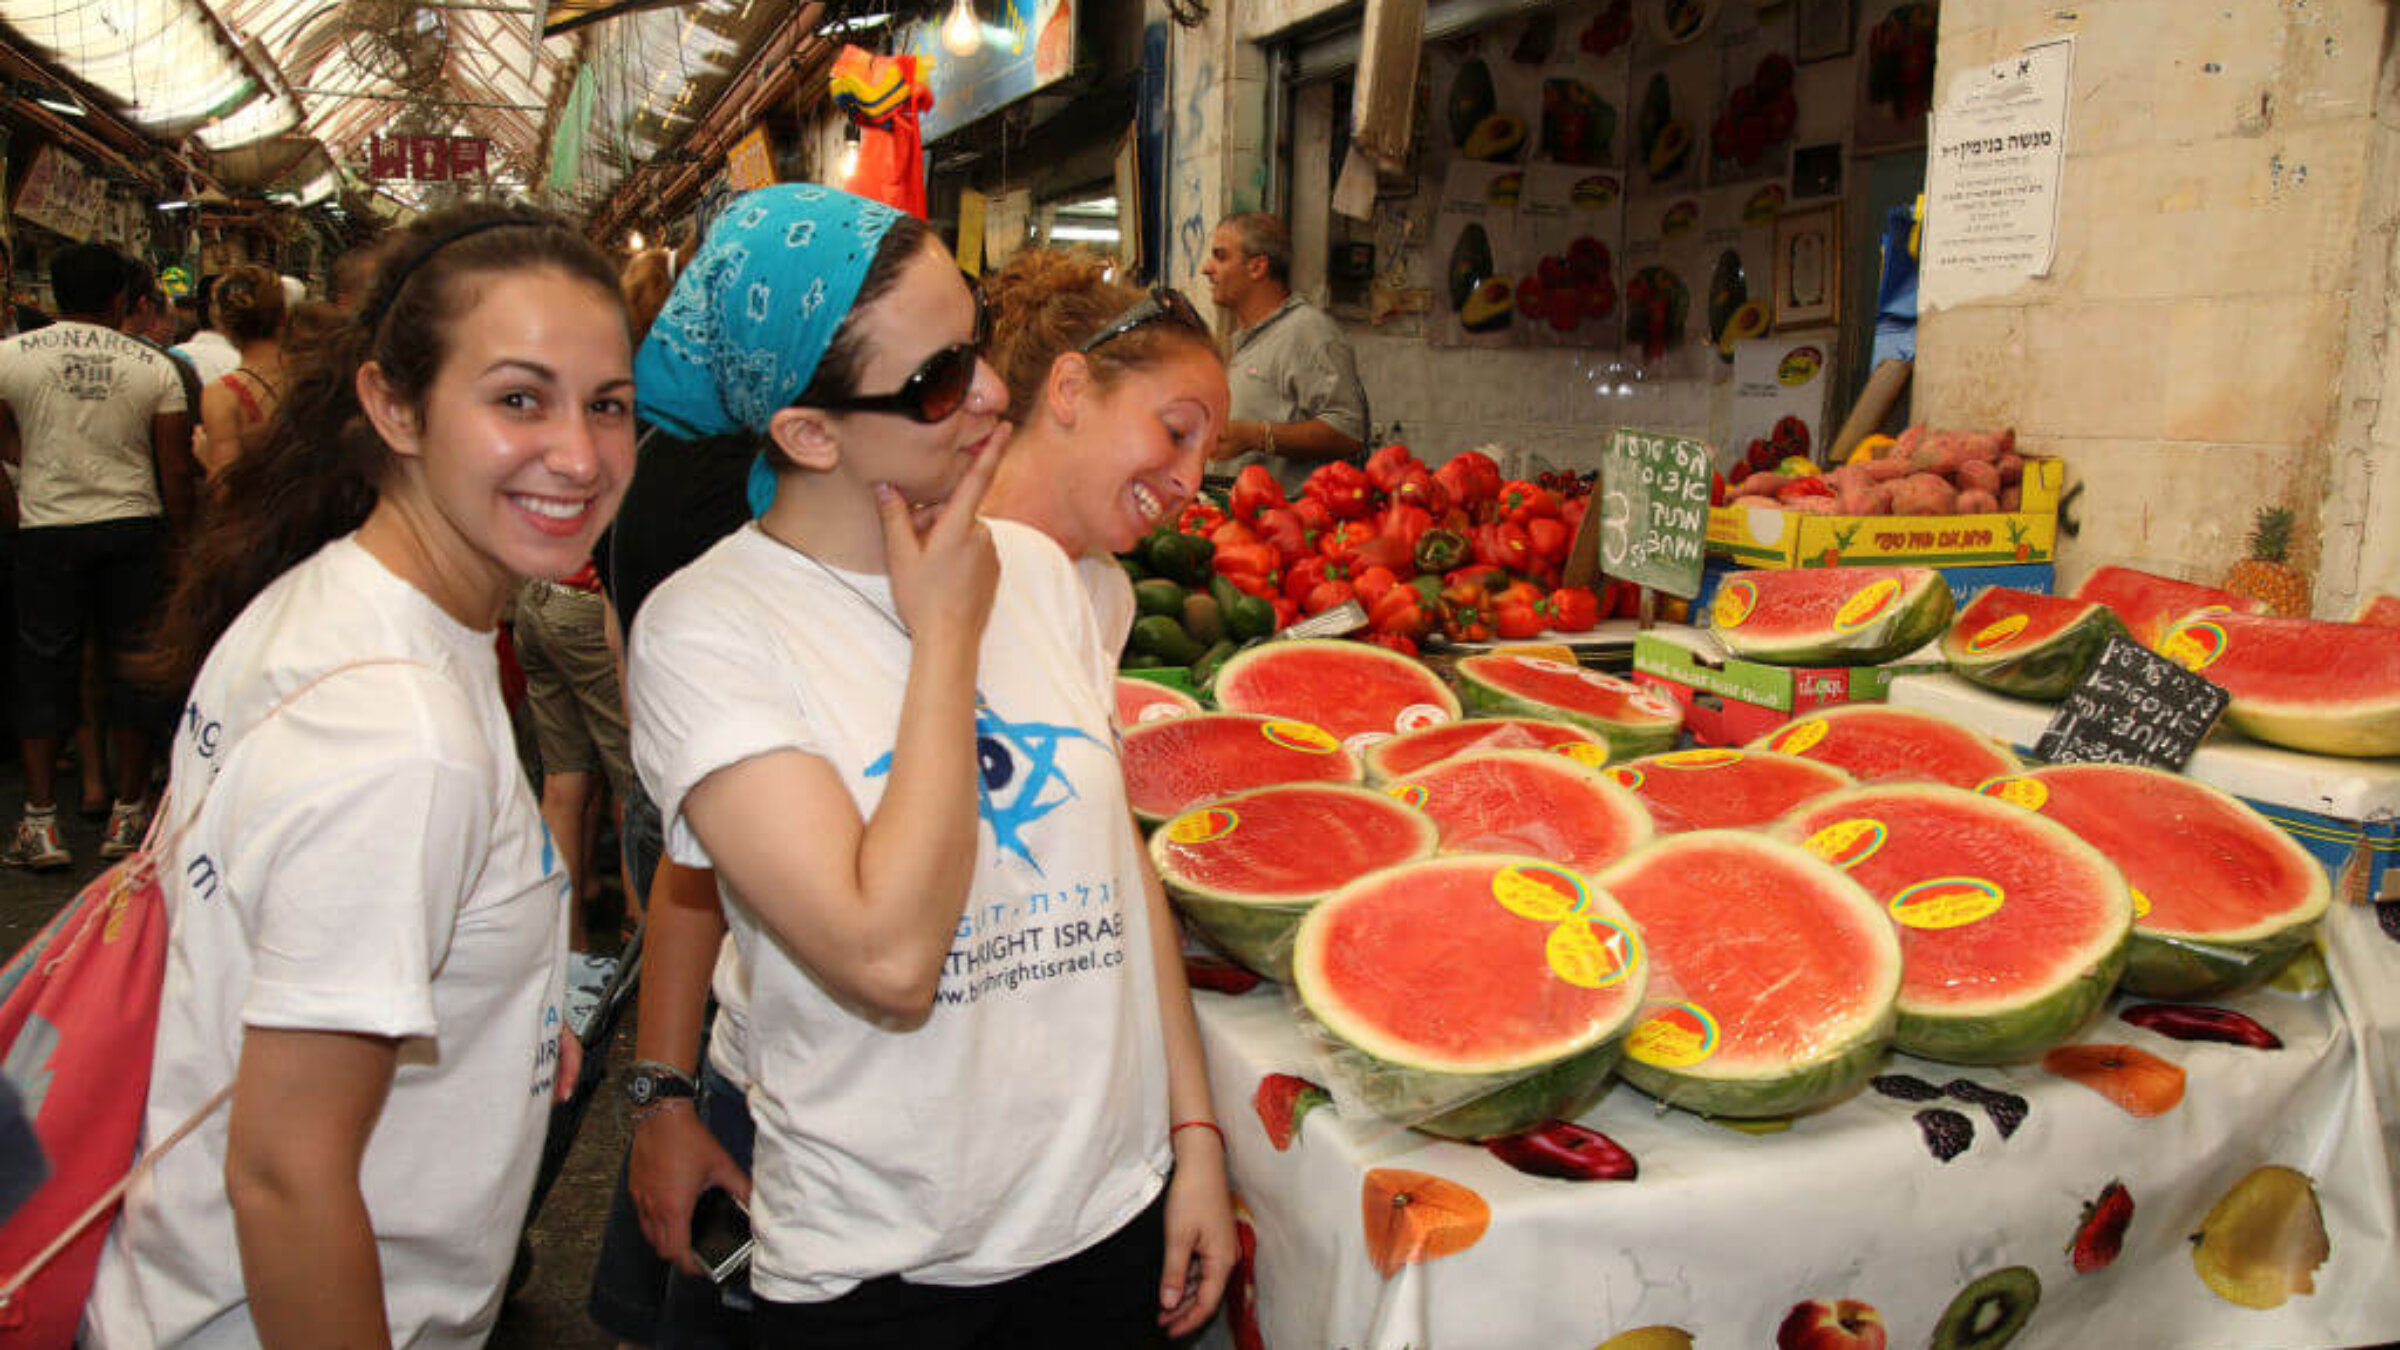 Three young American tourists on the Birthright (Taglit) program checking out the watermelon on a fruit stand in the Machane Yehuda Market, Jerusalem, Israel, August 28, 2009. 